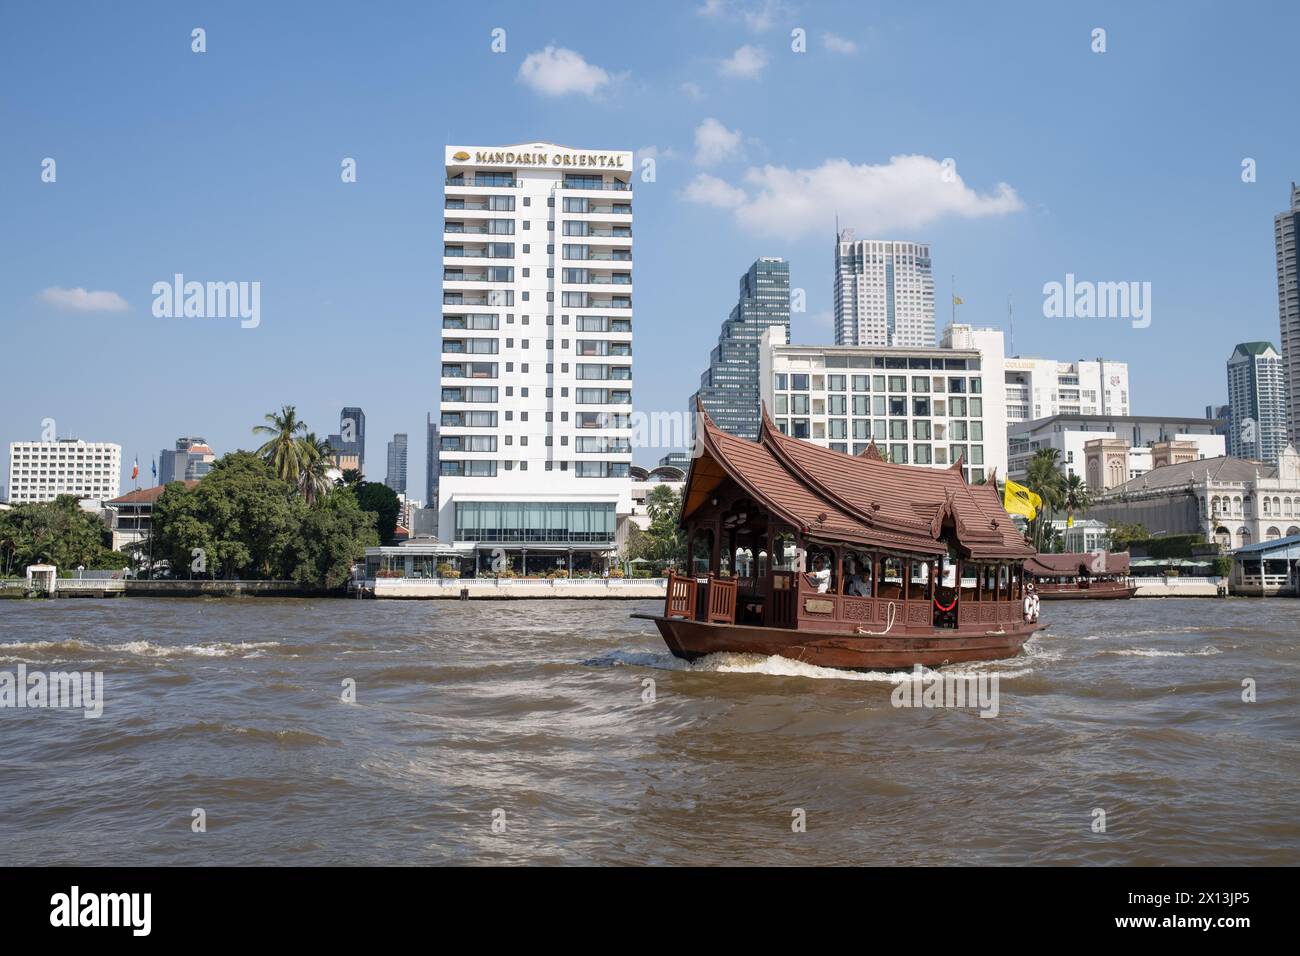 Oriental Hotel Passenger Ferry Boat on the Chao Phraya River in front of the Mandarin Oriental Hotel in Bangkok Thailand Stock Photo